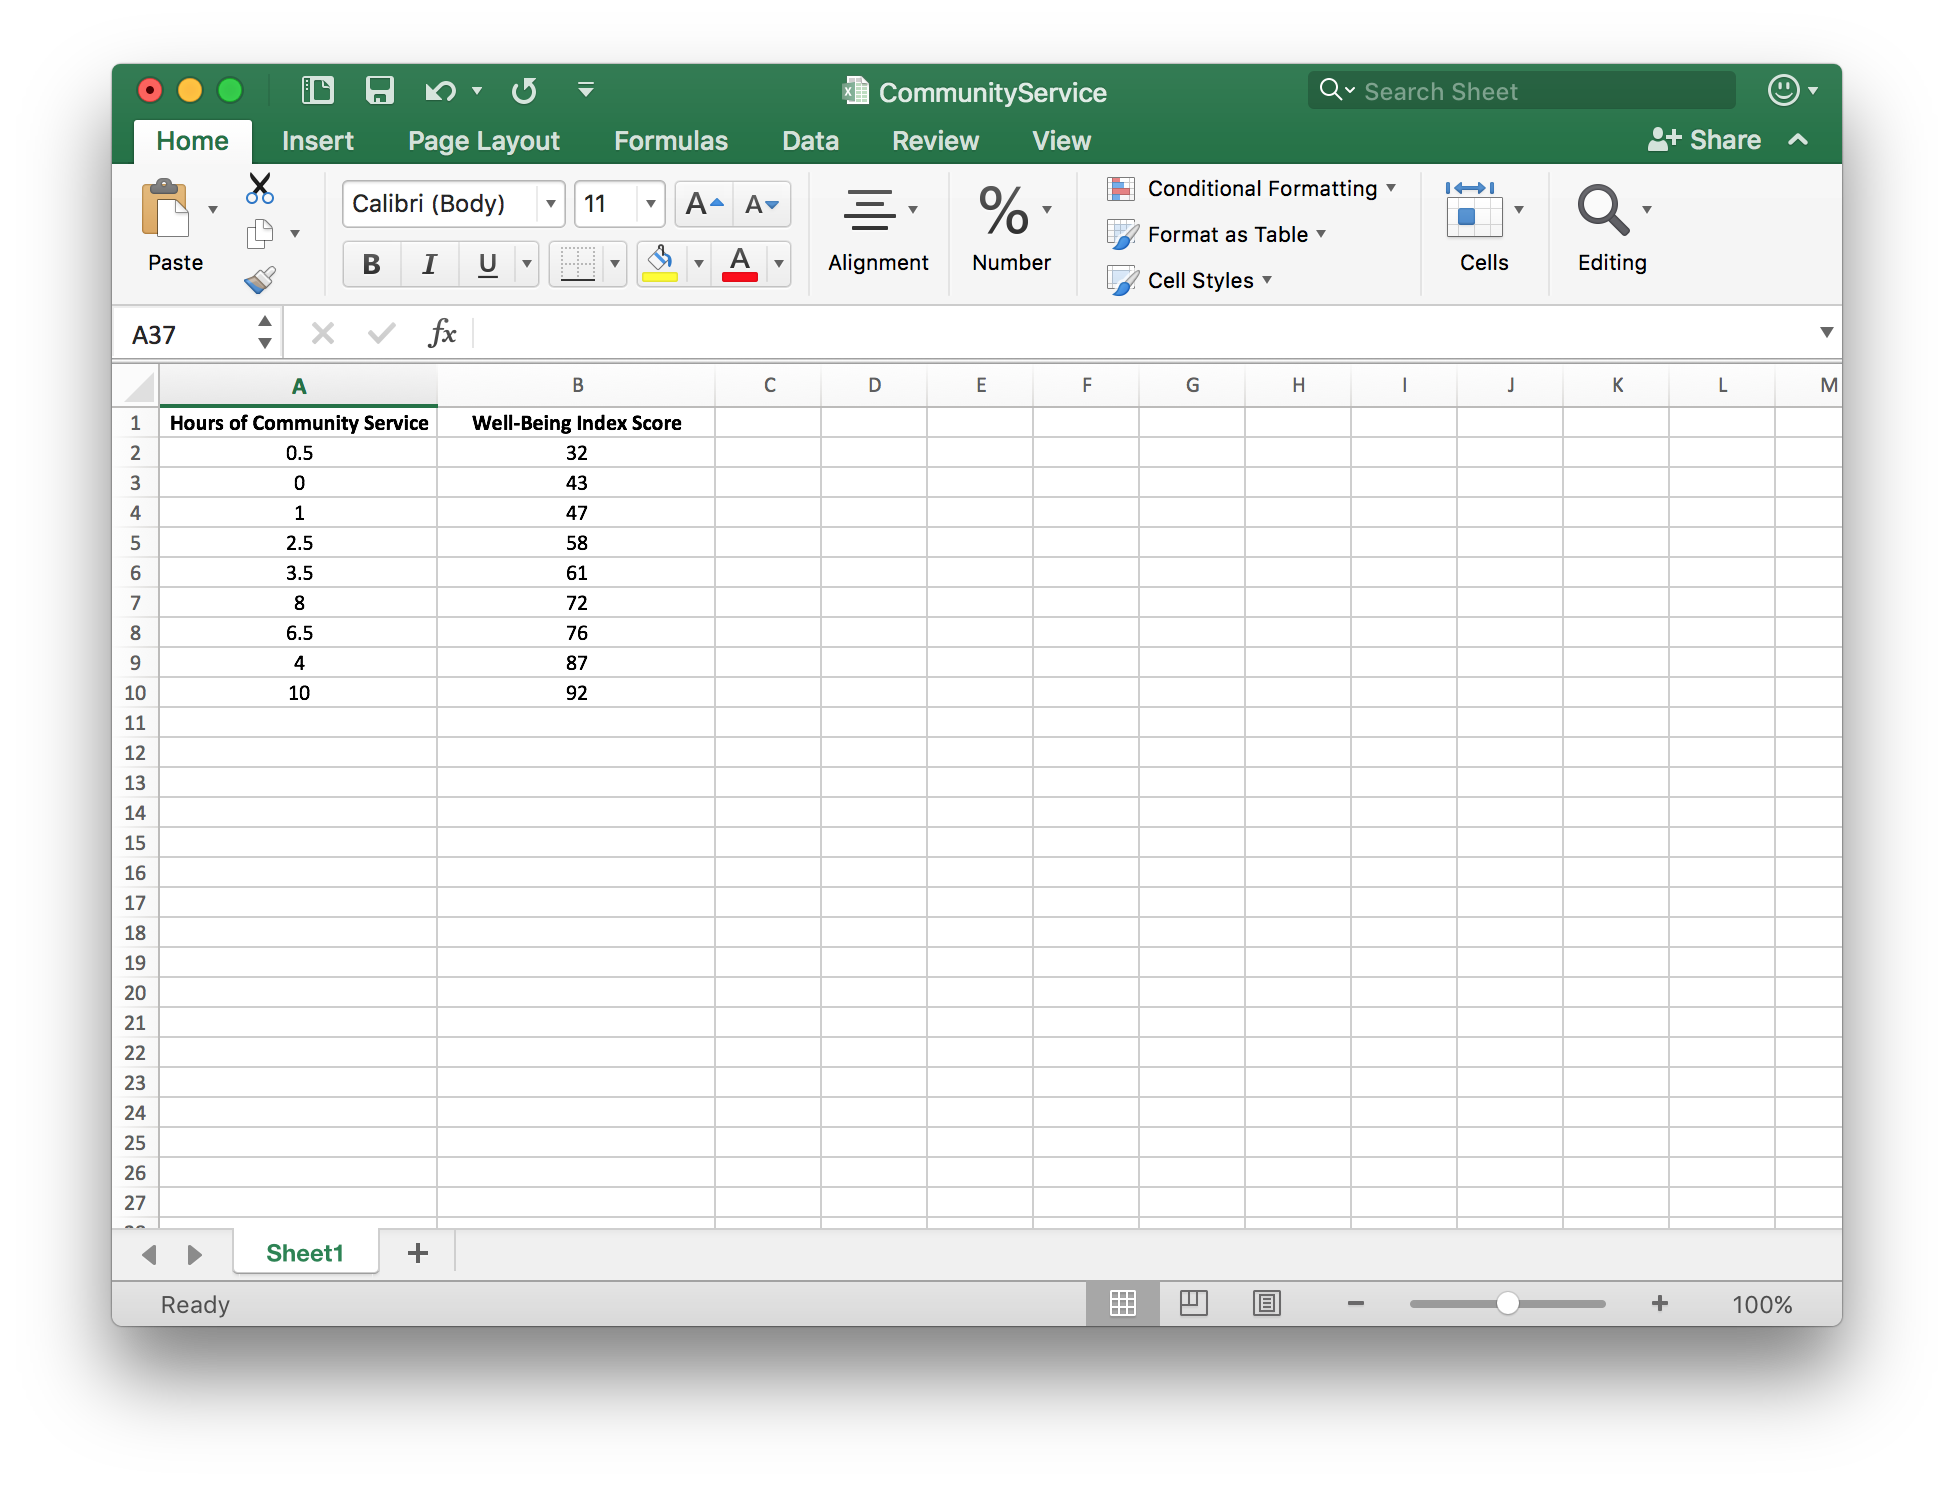 Spreadsheet containing the hours of community service and the Well-Being Index Score